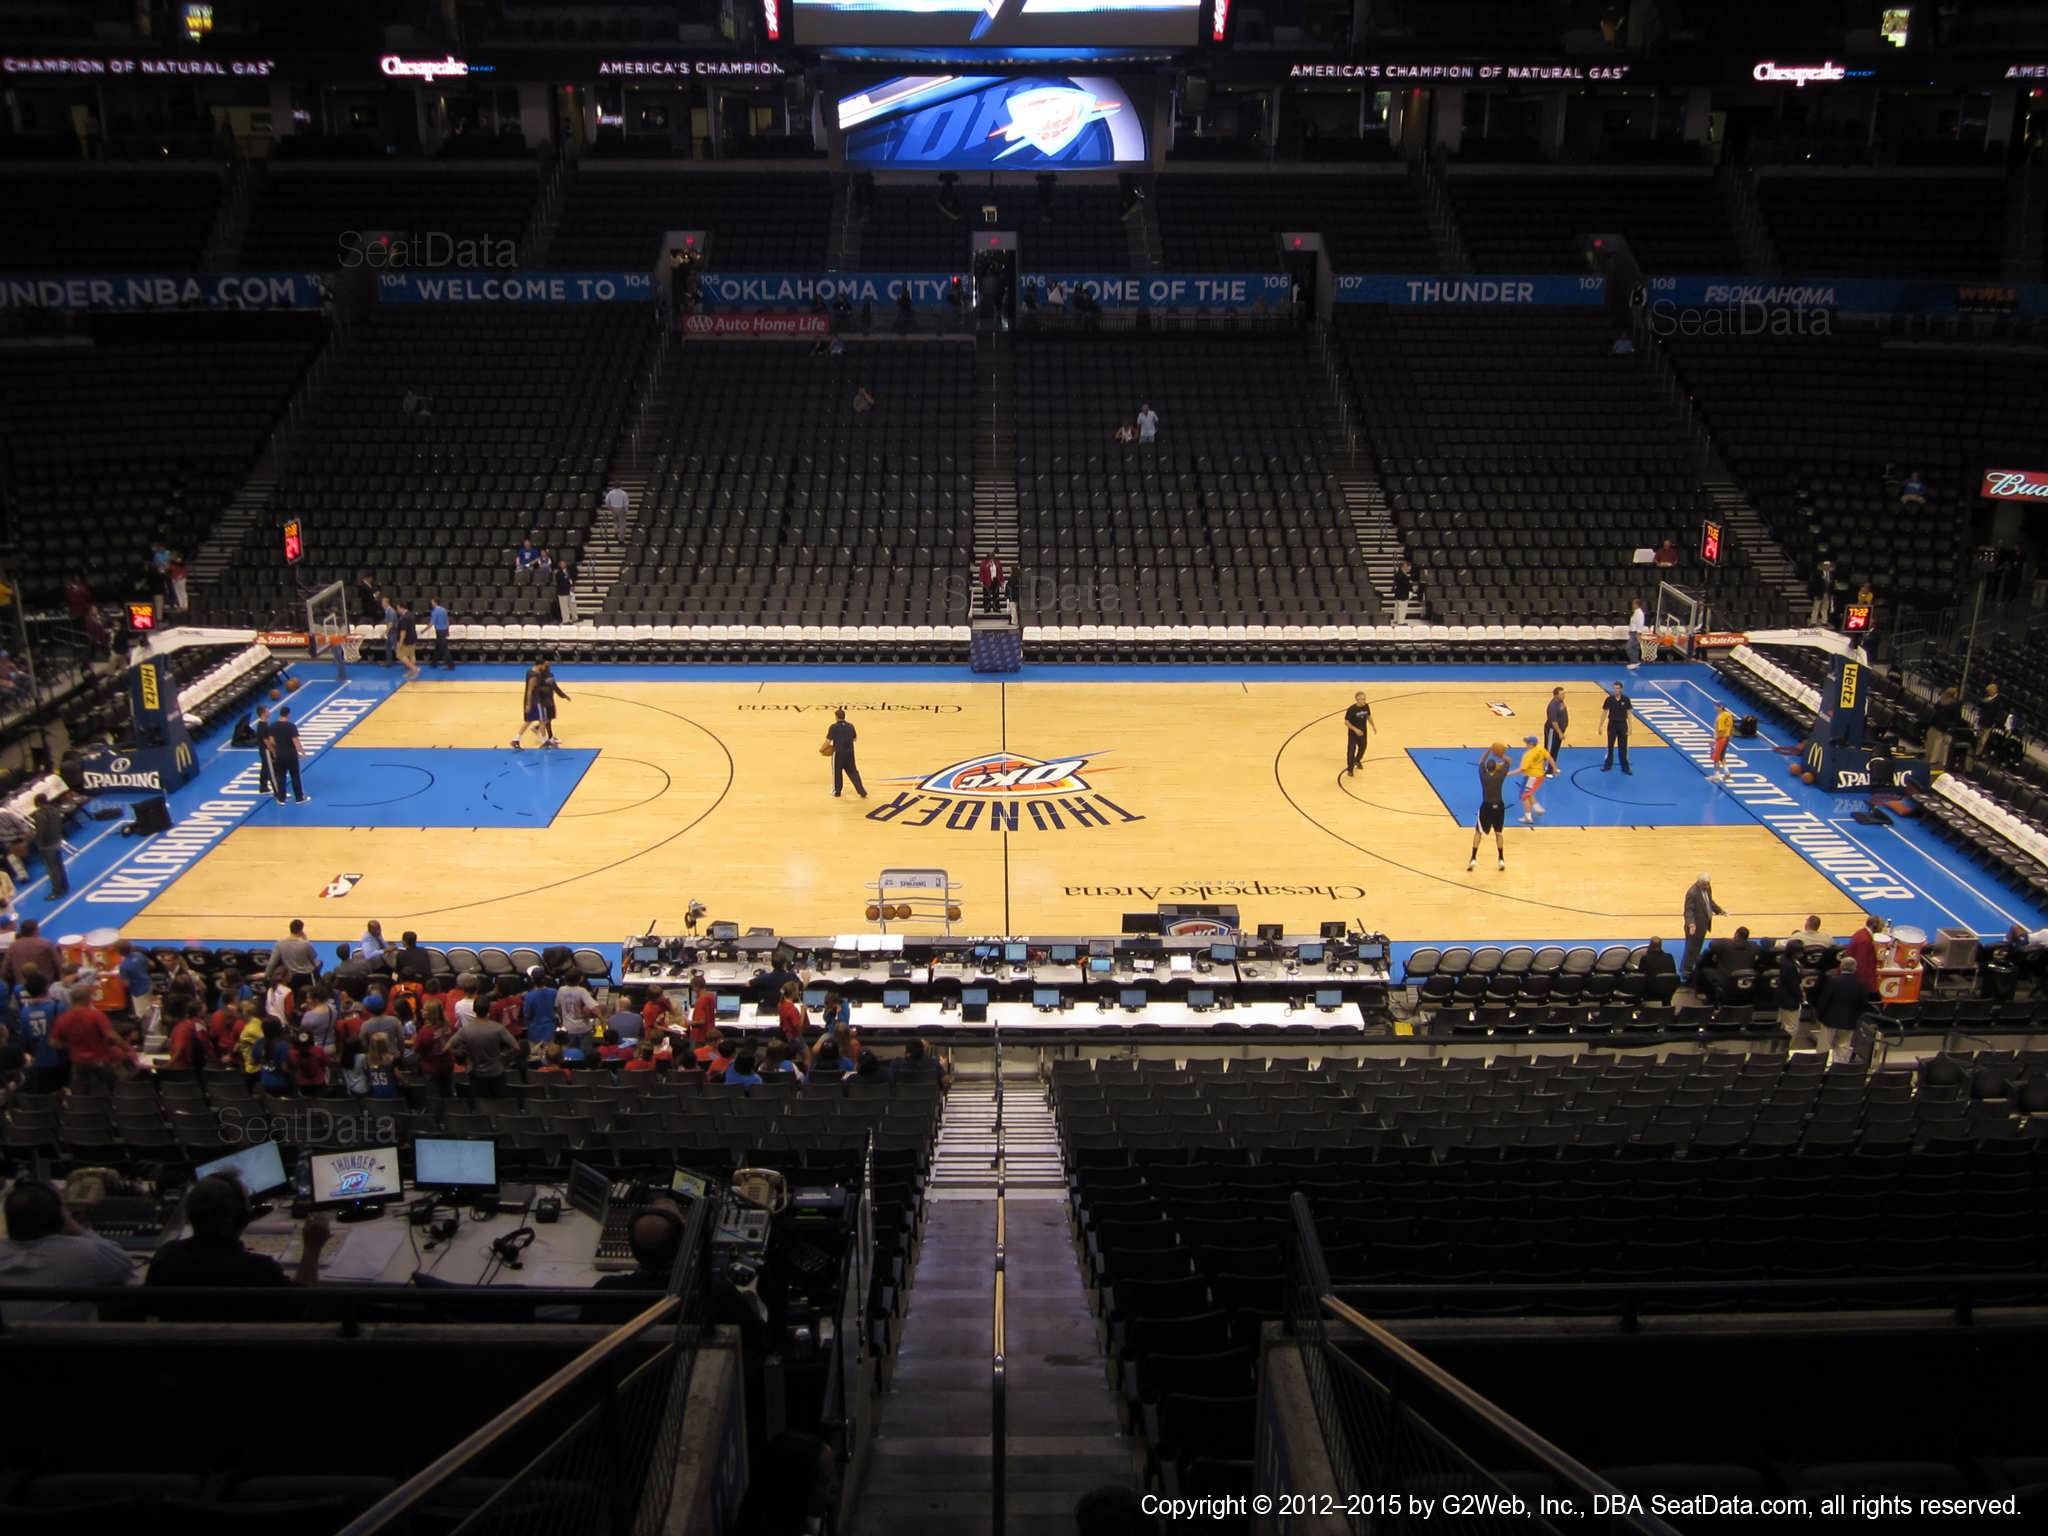 Seat view from section 223 at Chesapeake Energy Arena, home of the Oklahoma City Thunder